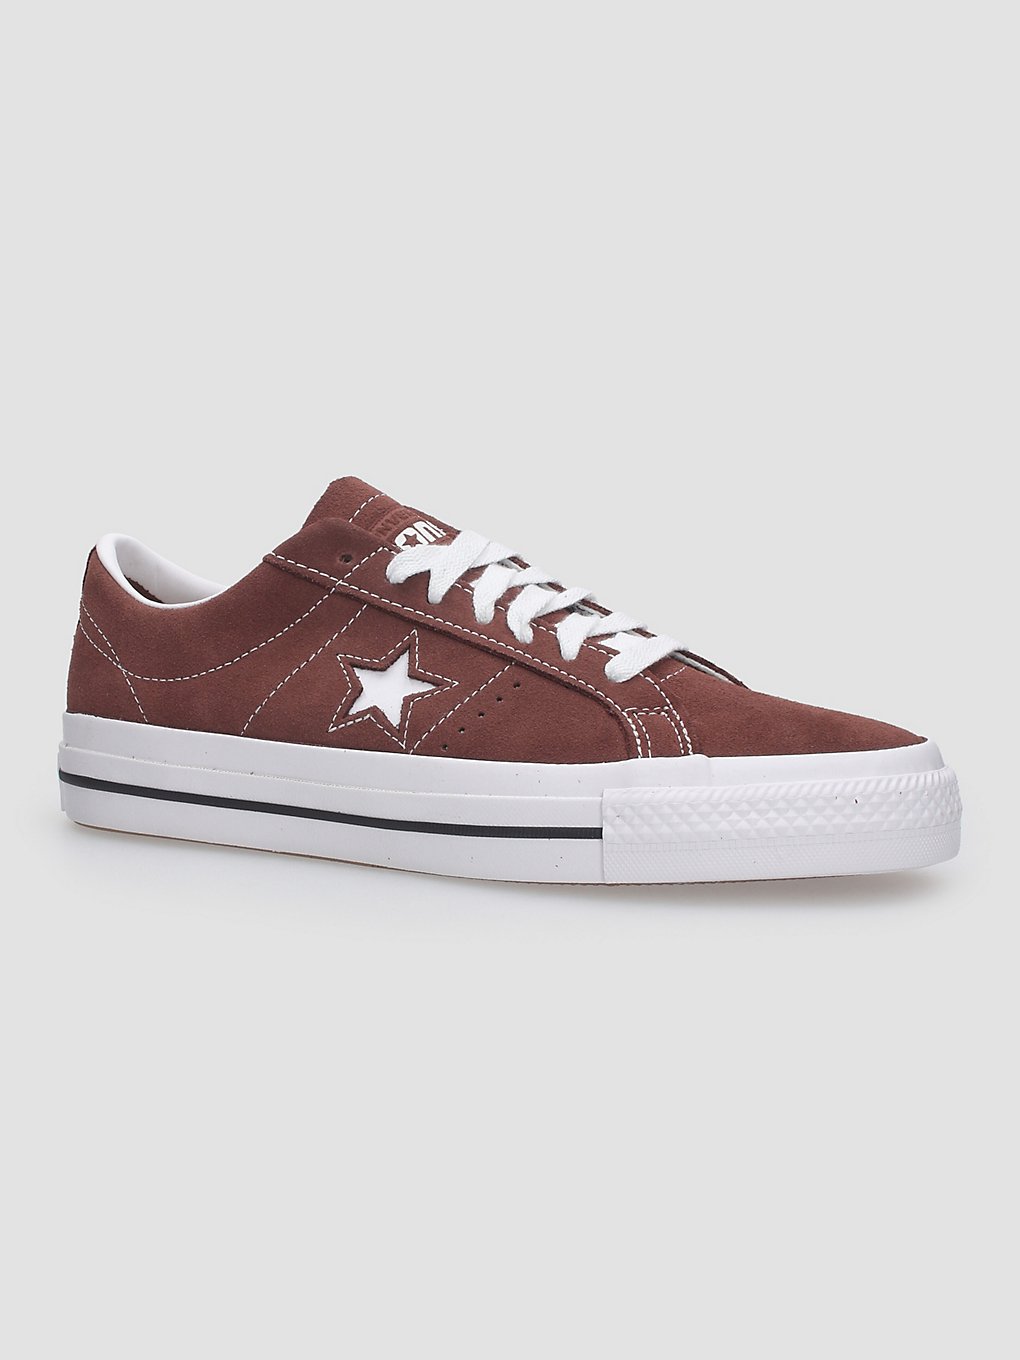 converse one star pro skate shoes black